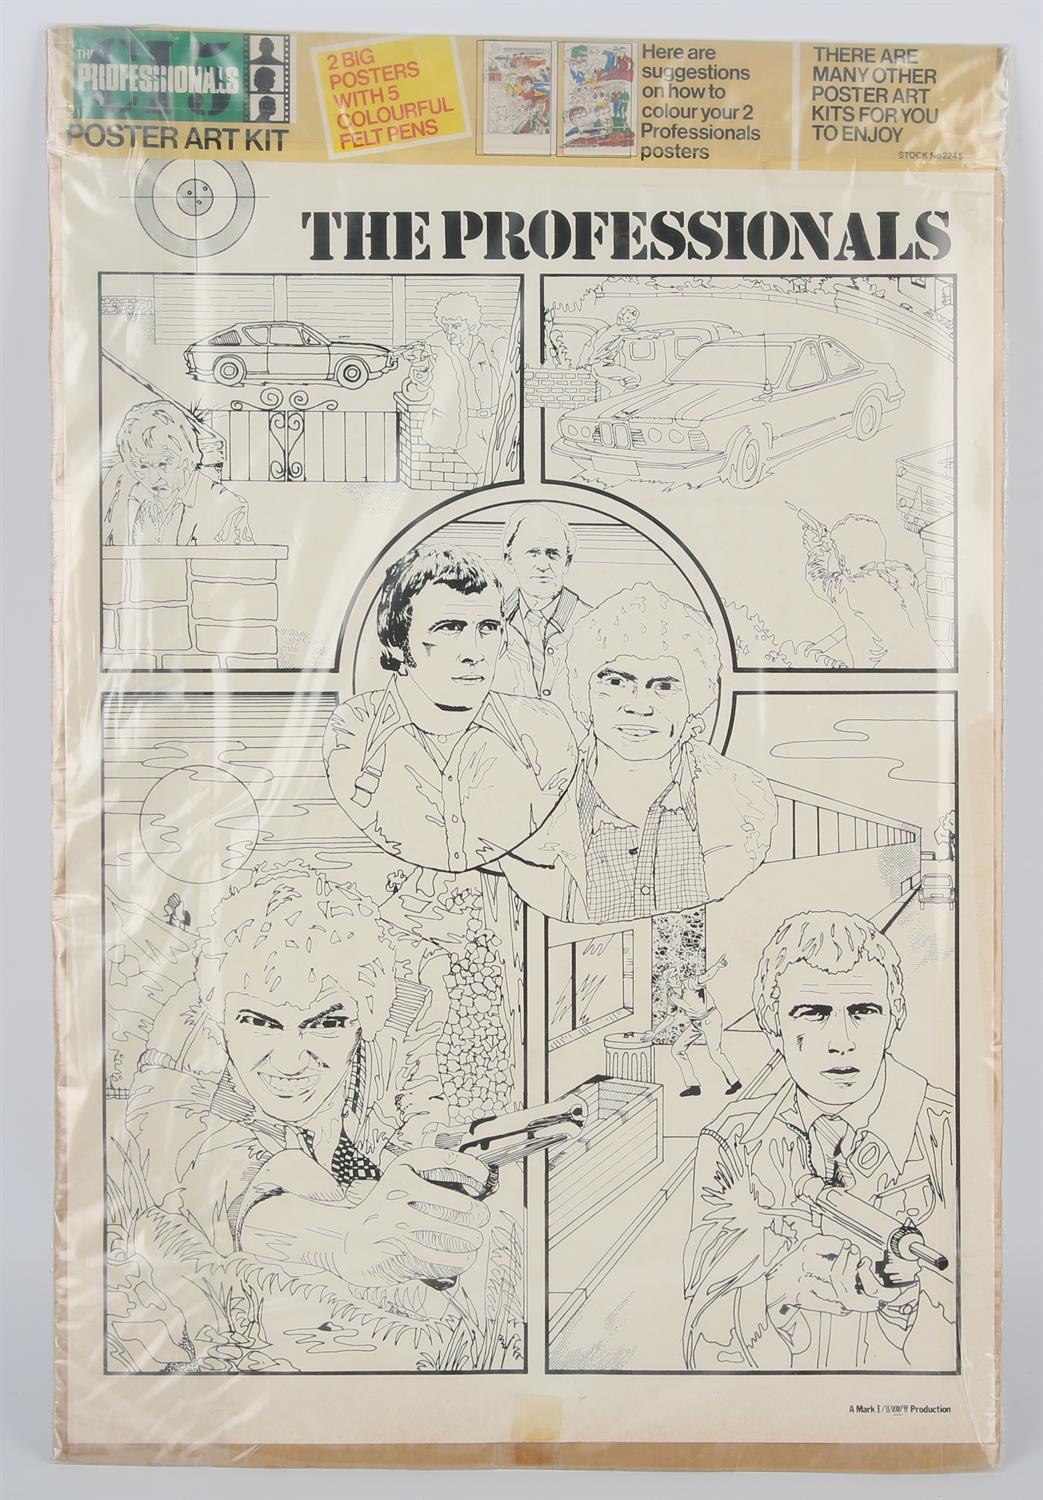 CI5 The Professionals - 2 Supa-posters poster art kit featuring Bodie and Doyle. Made by Thomas - Image 2 of 2